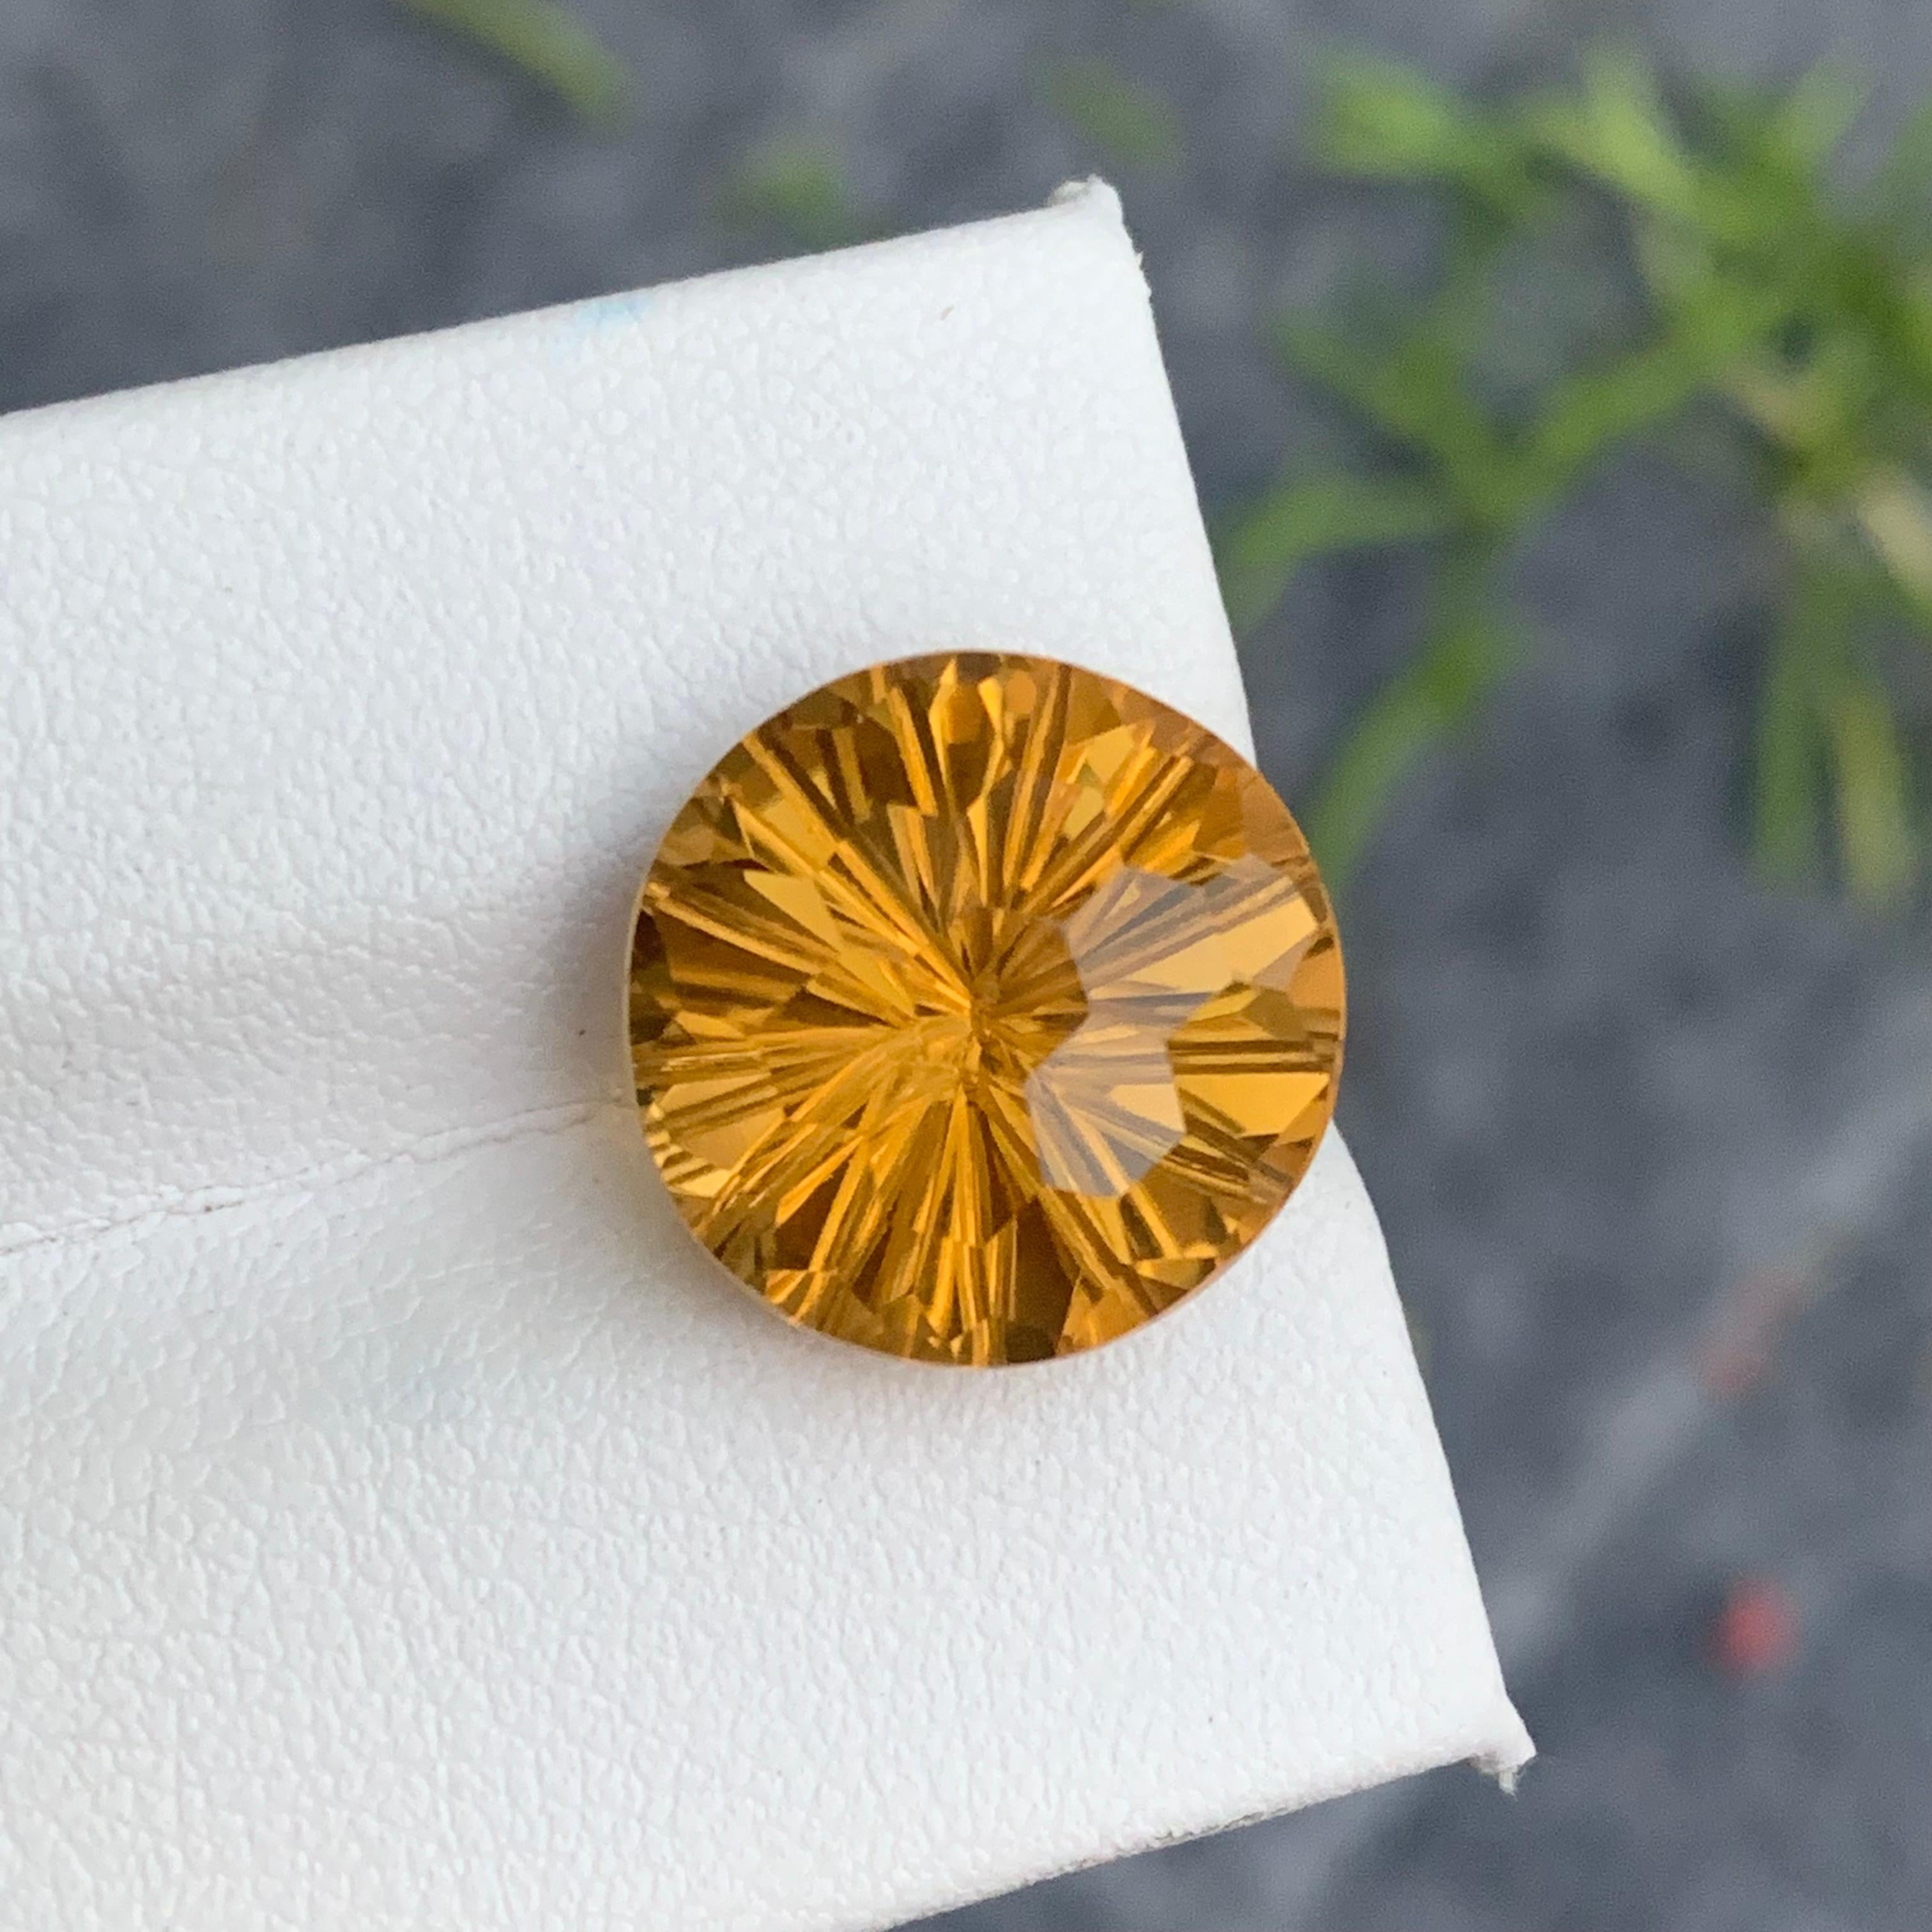 Faceted Citrine
Weight : 10 Carats
Dimensions : 14.4x14.4x10.2 Mm
Clarity : Eye Clean 
Origin : Brazil
Color: Yellow
Shape: Round
Cut: Laser
Certificate: On Demand
Month: November
.
The Many Healing Properties of Citrine
Increase Optimism, And Sunny